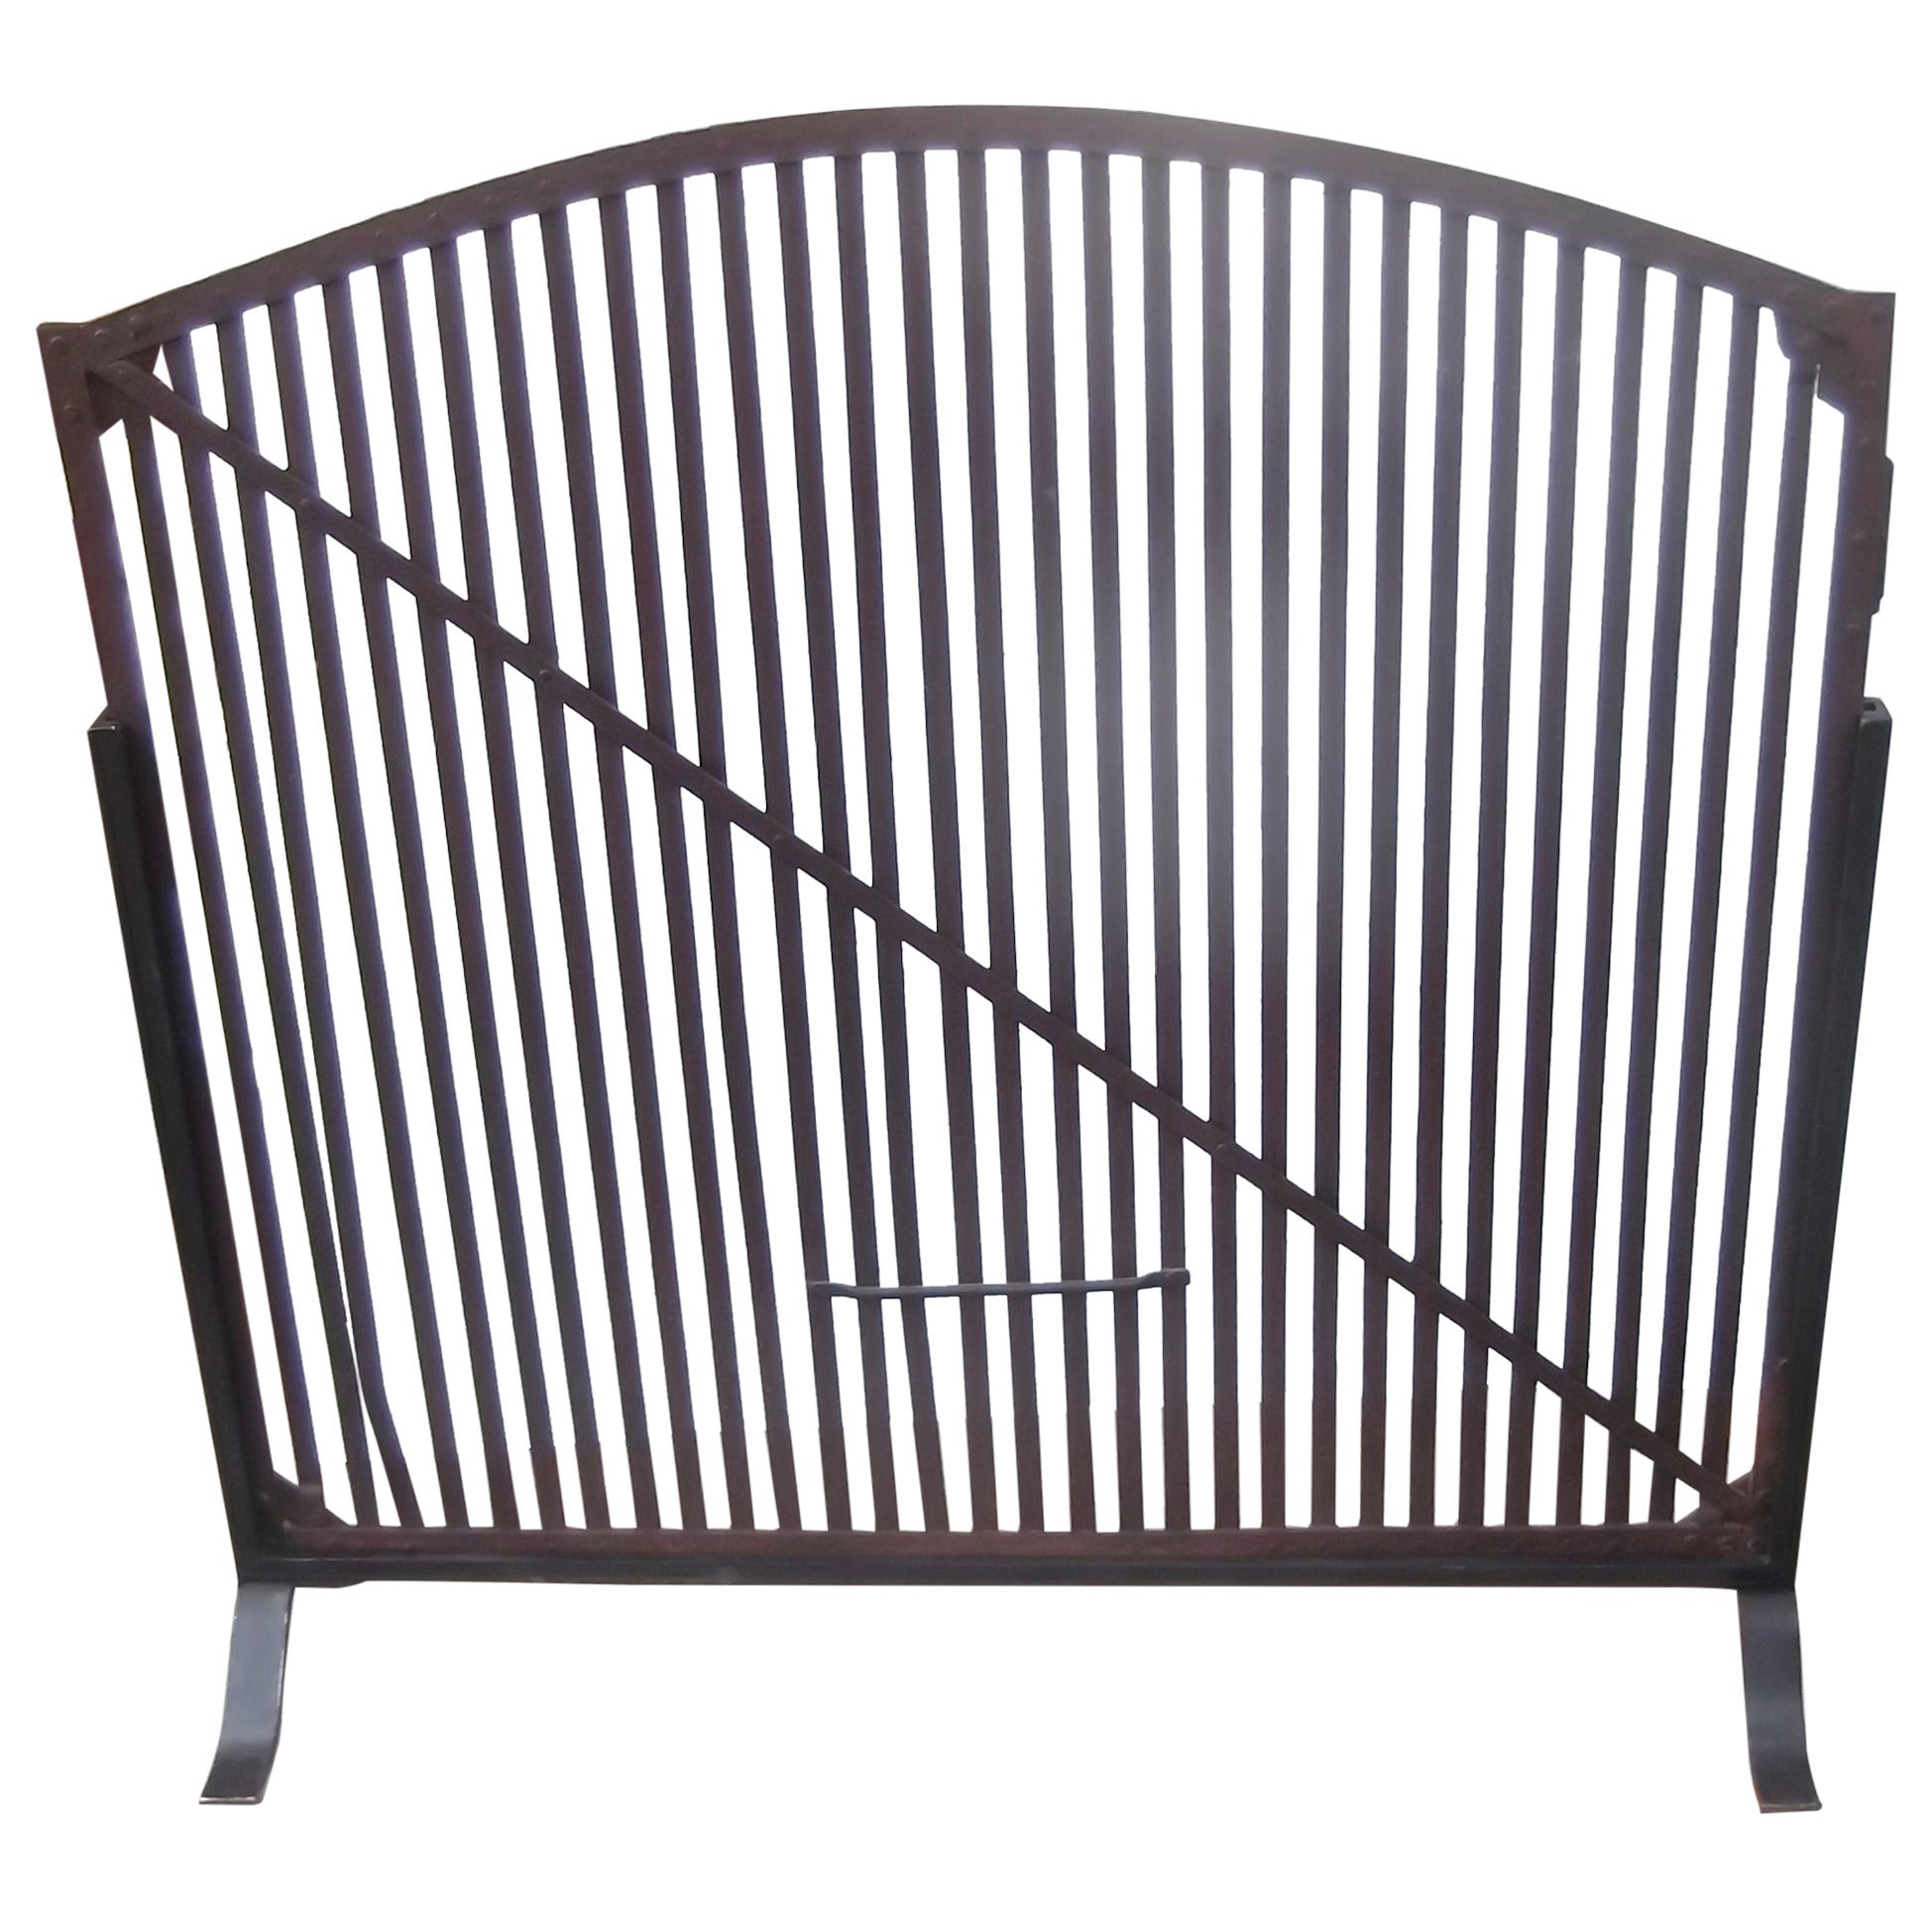 Antique Fire Screen Grate, Mid-19th Century